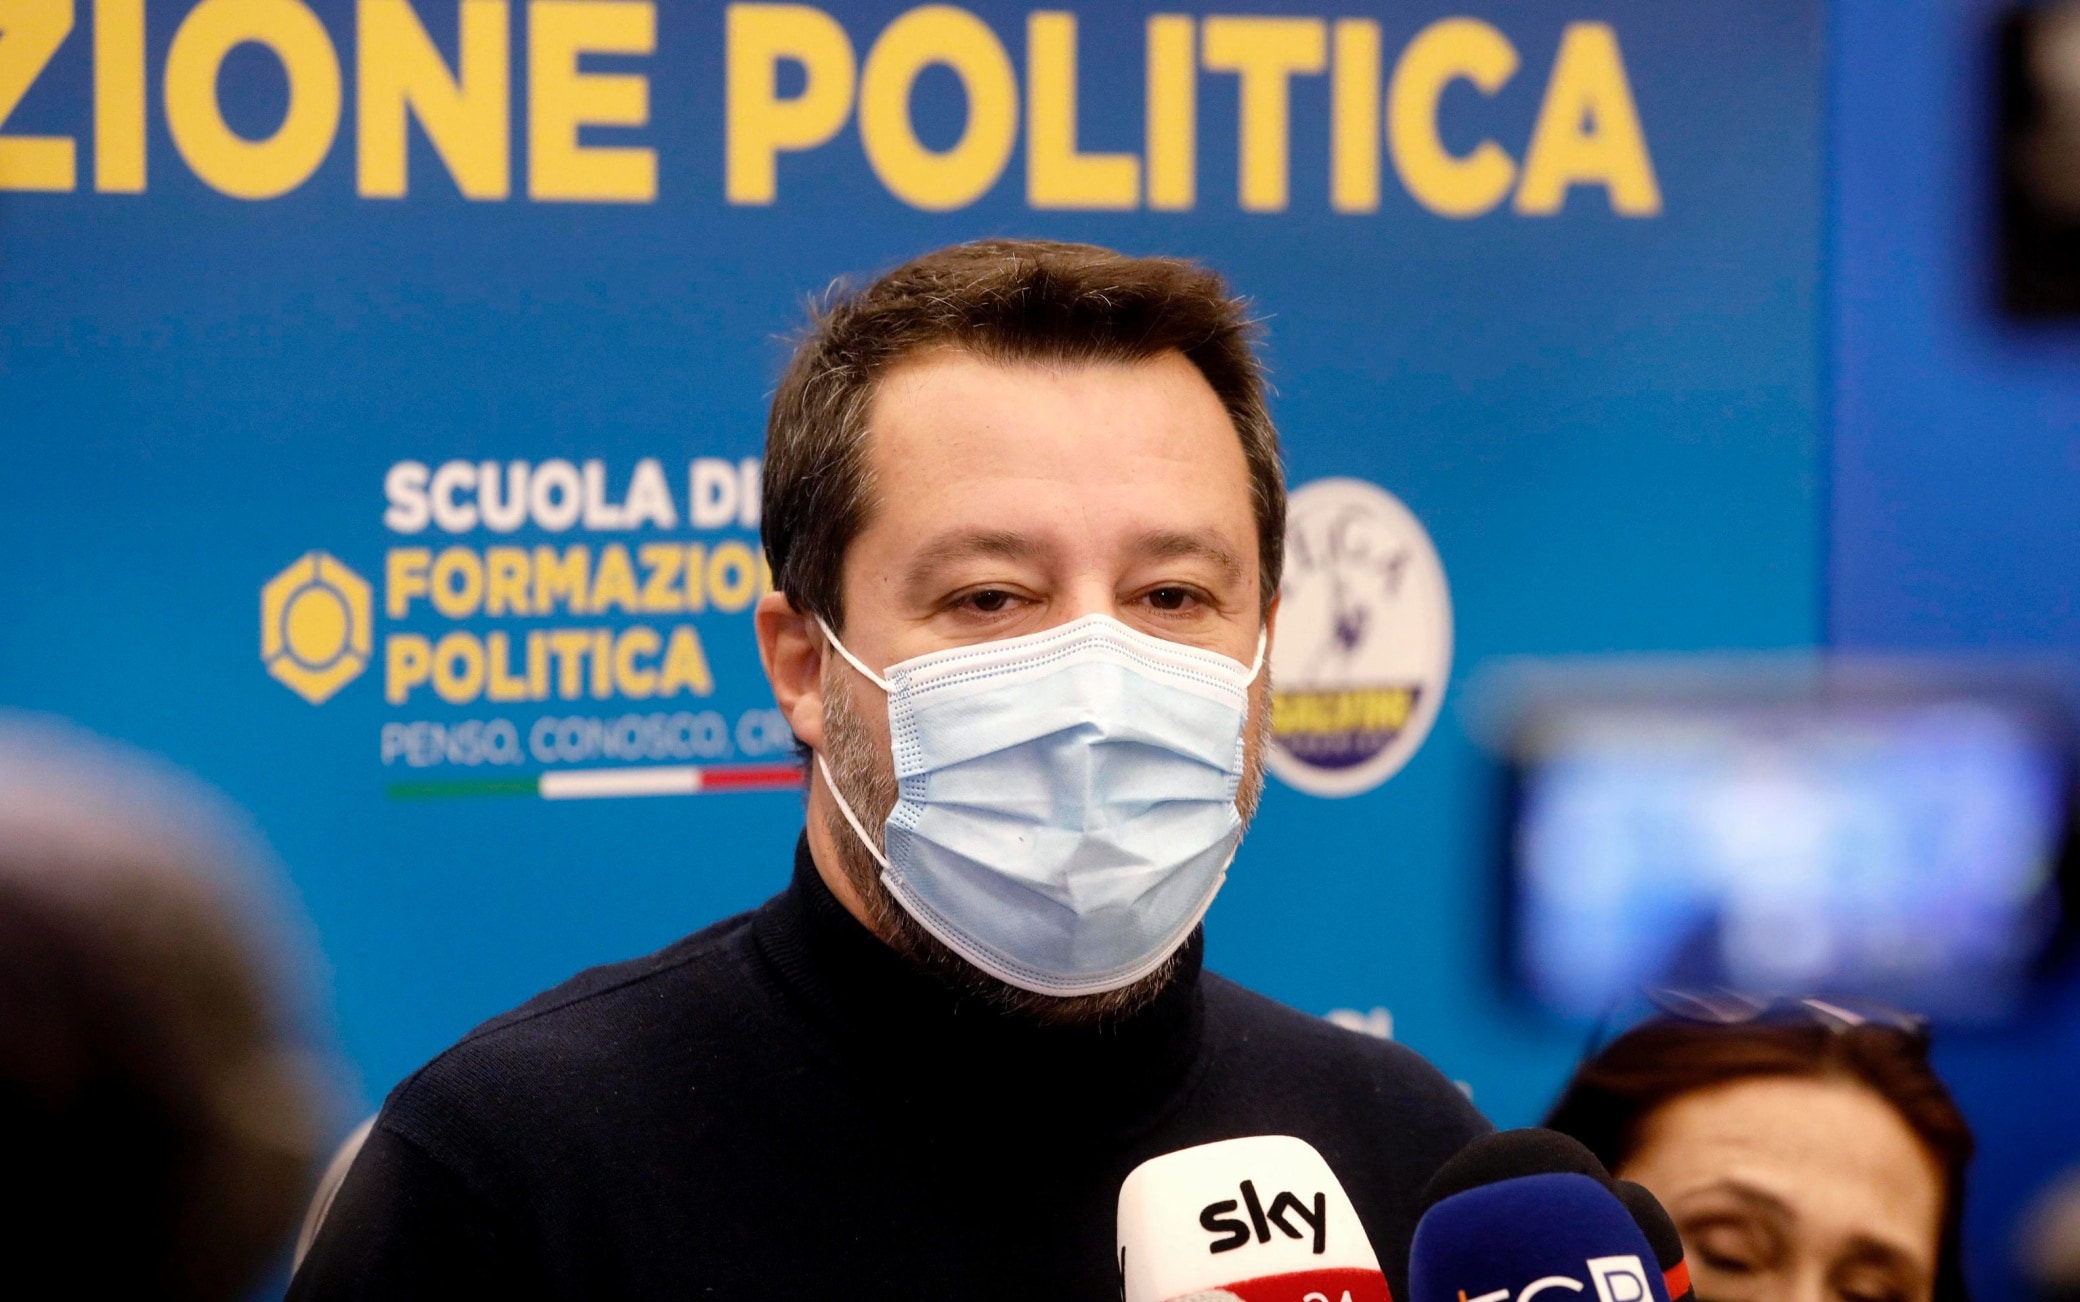 Salvini: “In the EU, the League is not in small groups chasing the left”